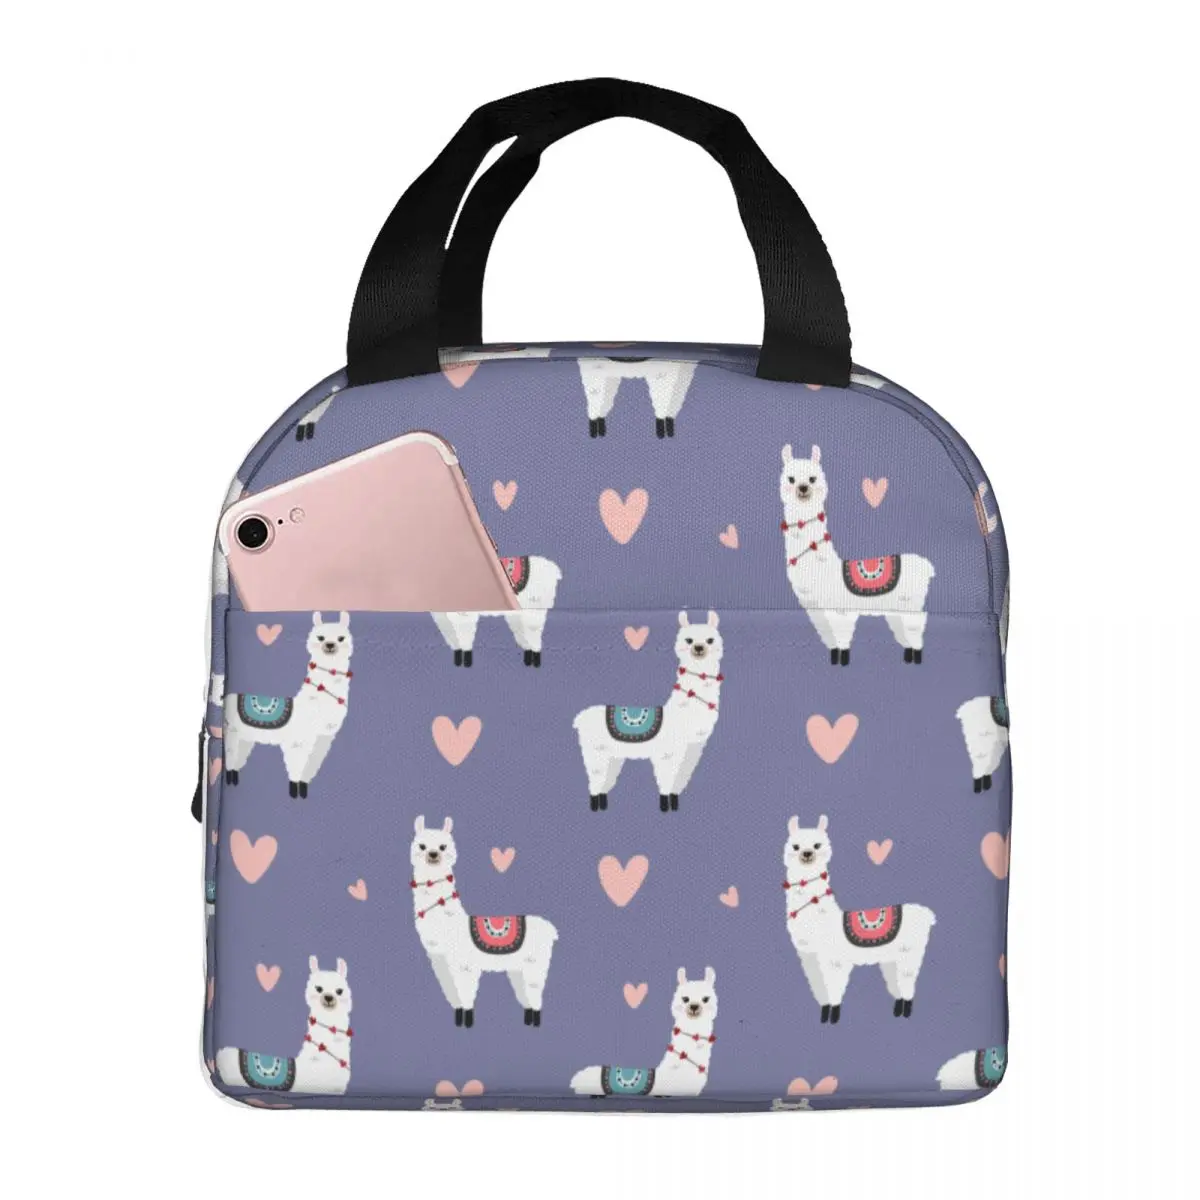 Llamas And Hearts Lunch Bags Portable Insulated Canvas Cooler Bags Thermal Cold Food Picnic Lunch Box for Women Kids